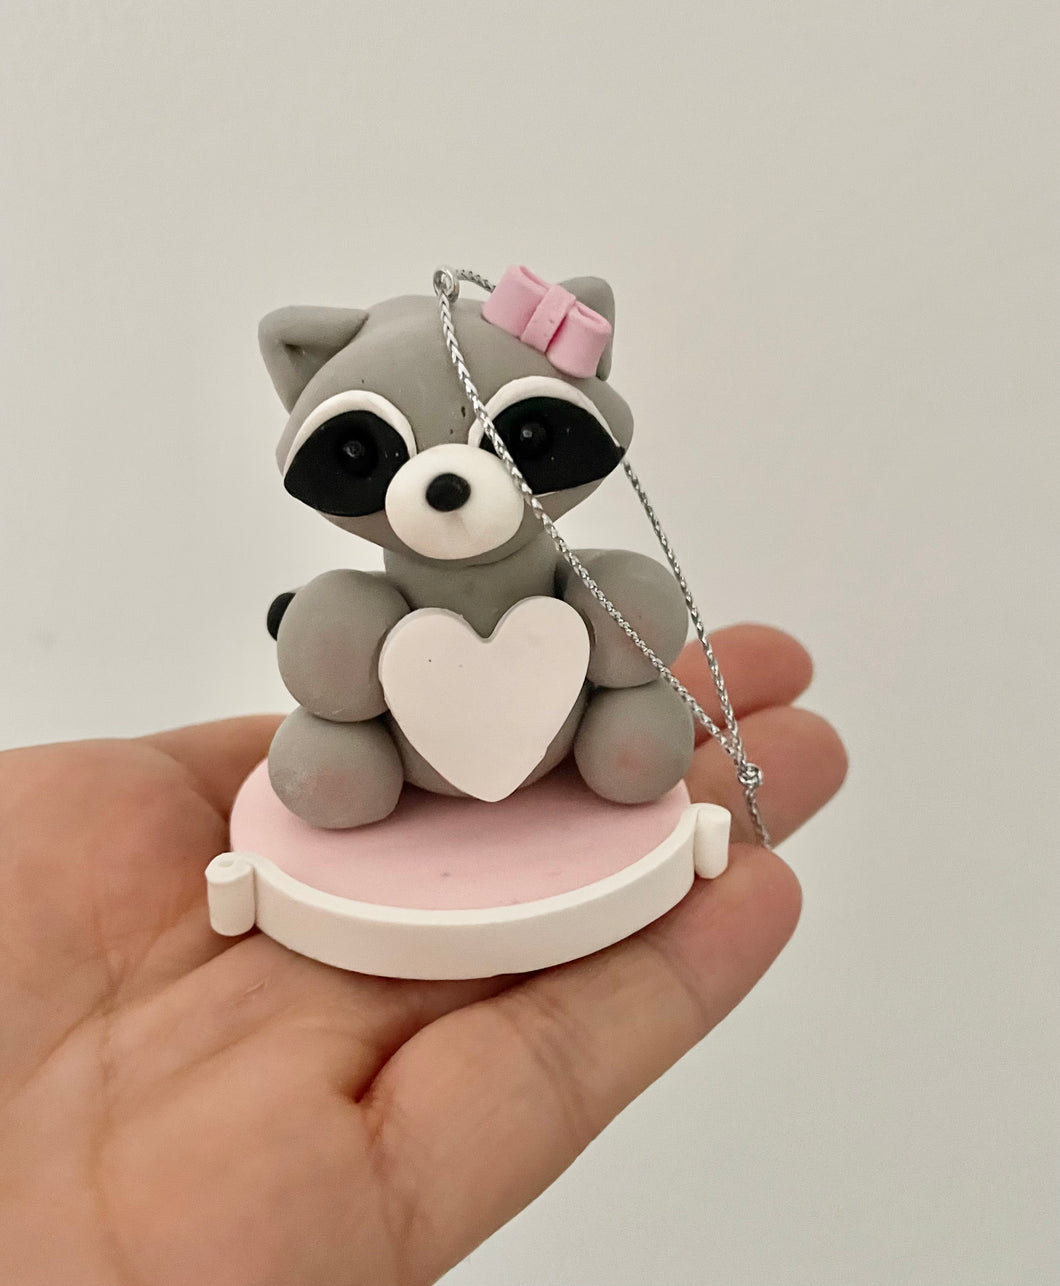 Racoon ornament